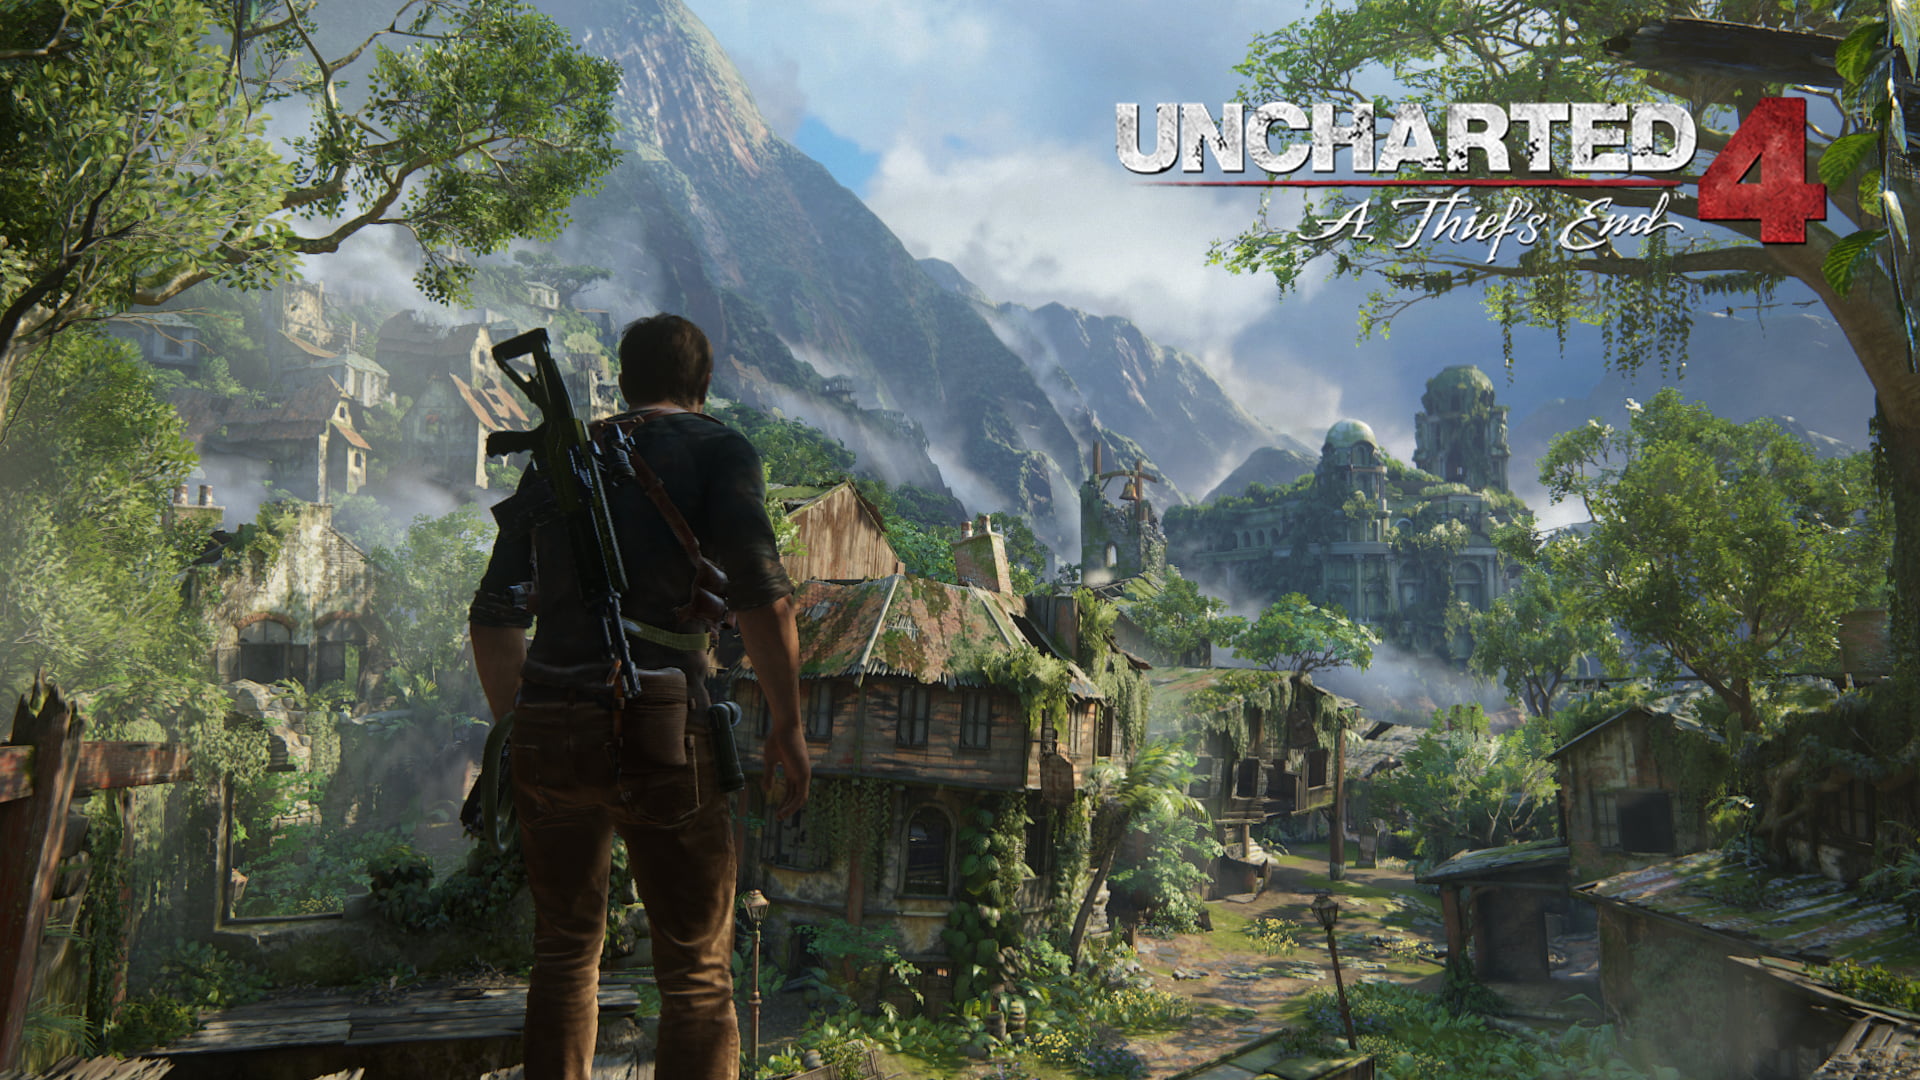 Uncharted 4 Lost City - HD Wallpaper 